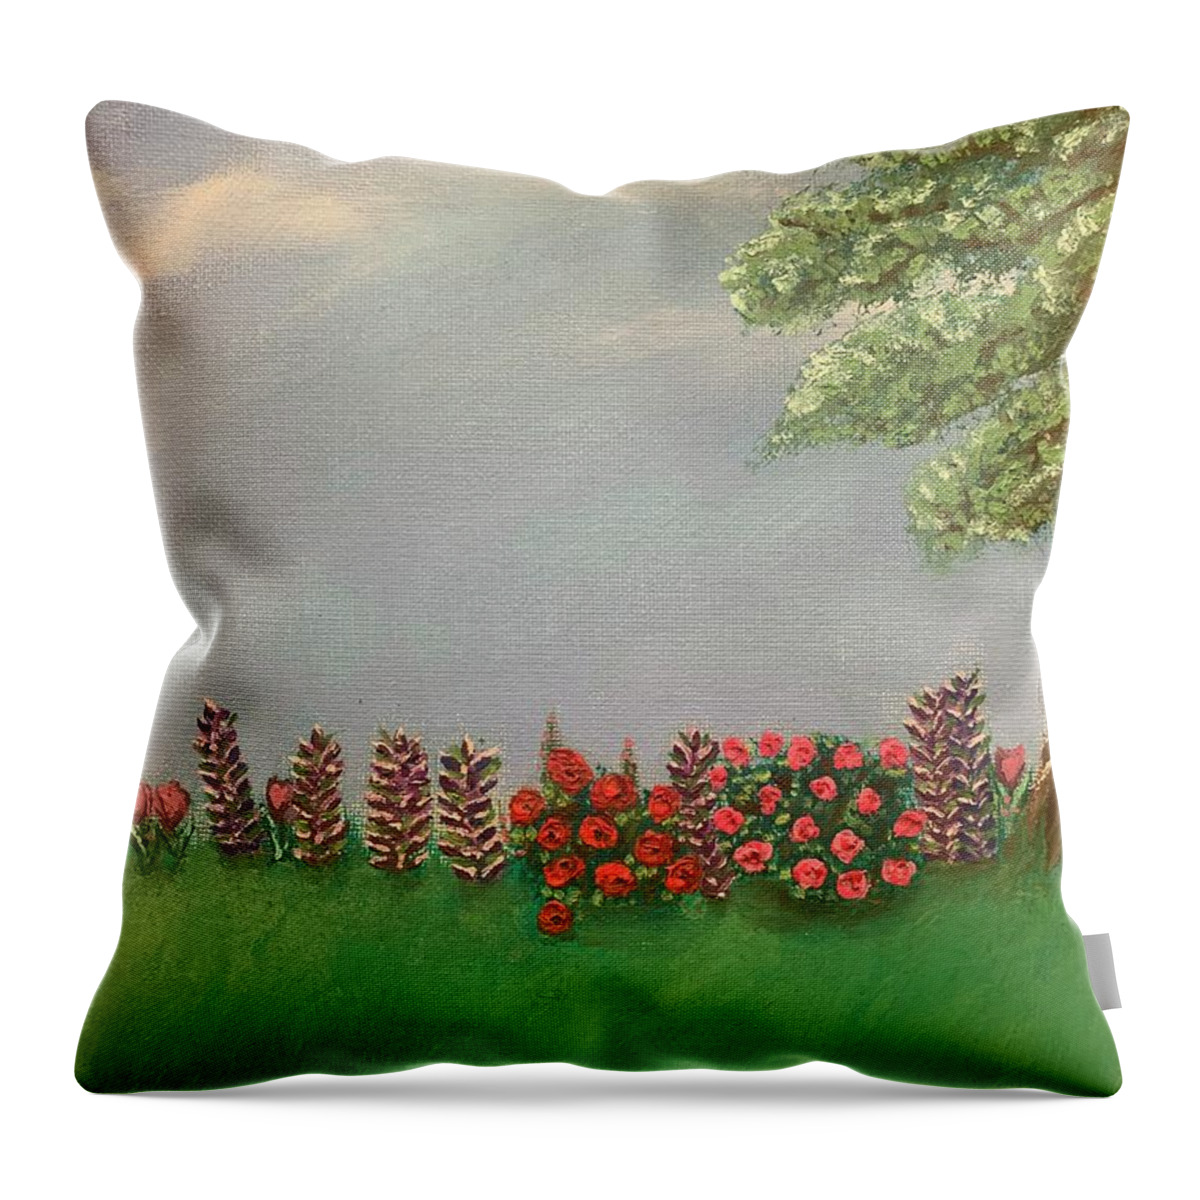 Oil Throw Pillow featuring the painting Grandmas Garden by Lisa White